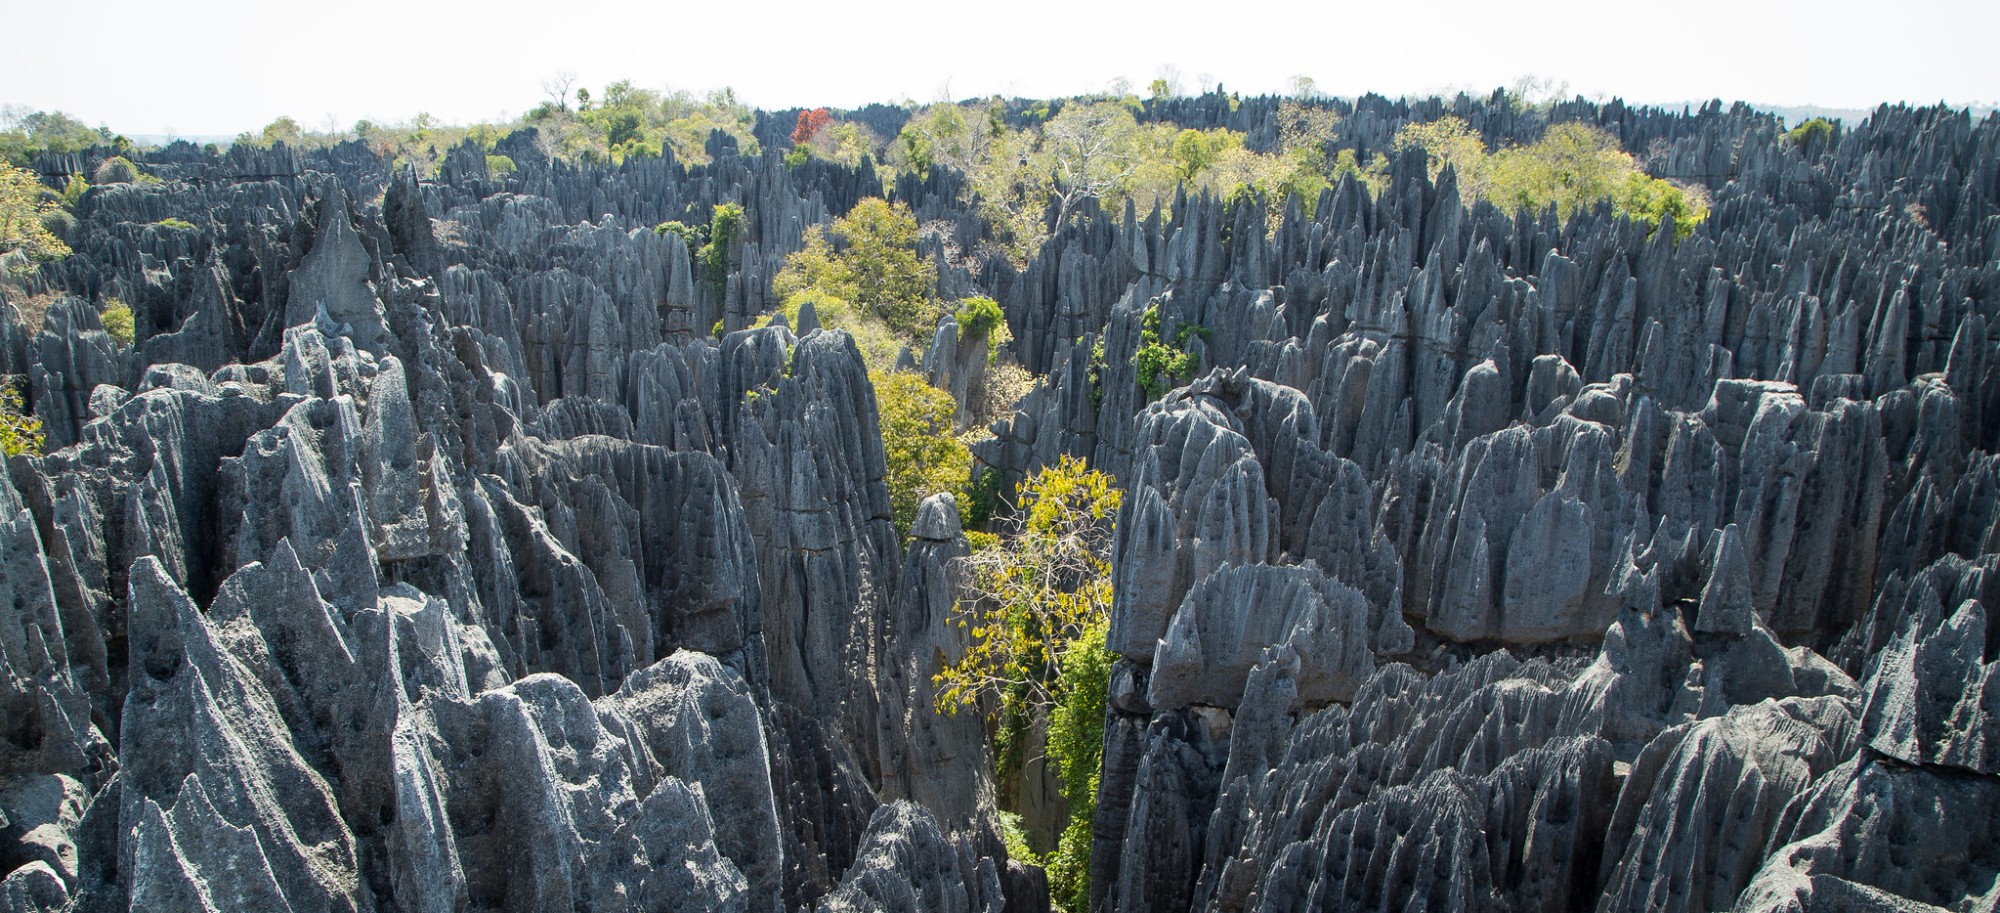 Within the western reaches of Madagascar lie extraordinary geological marvels, the Tsingy de Bemaraha National Park and the enigmatic Forest of Knives. These offer a glimpse into the island's rich geological history and the intricate dance between time and nature. From the towering limestone pinnacles of the Tsingy to the jagged stone formations of the Forest of Knives, each site tells a story millions of years in the making.